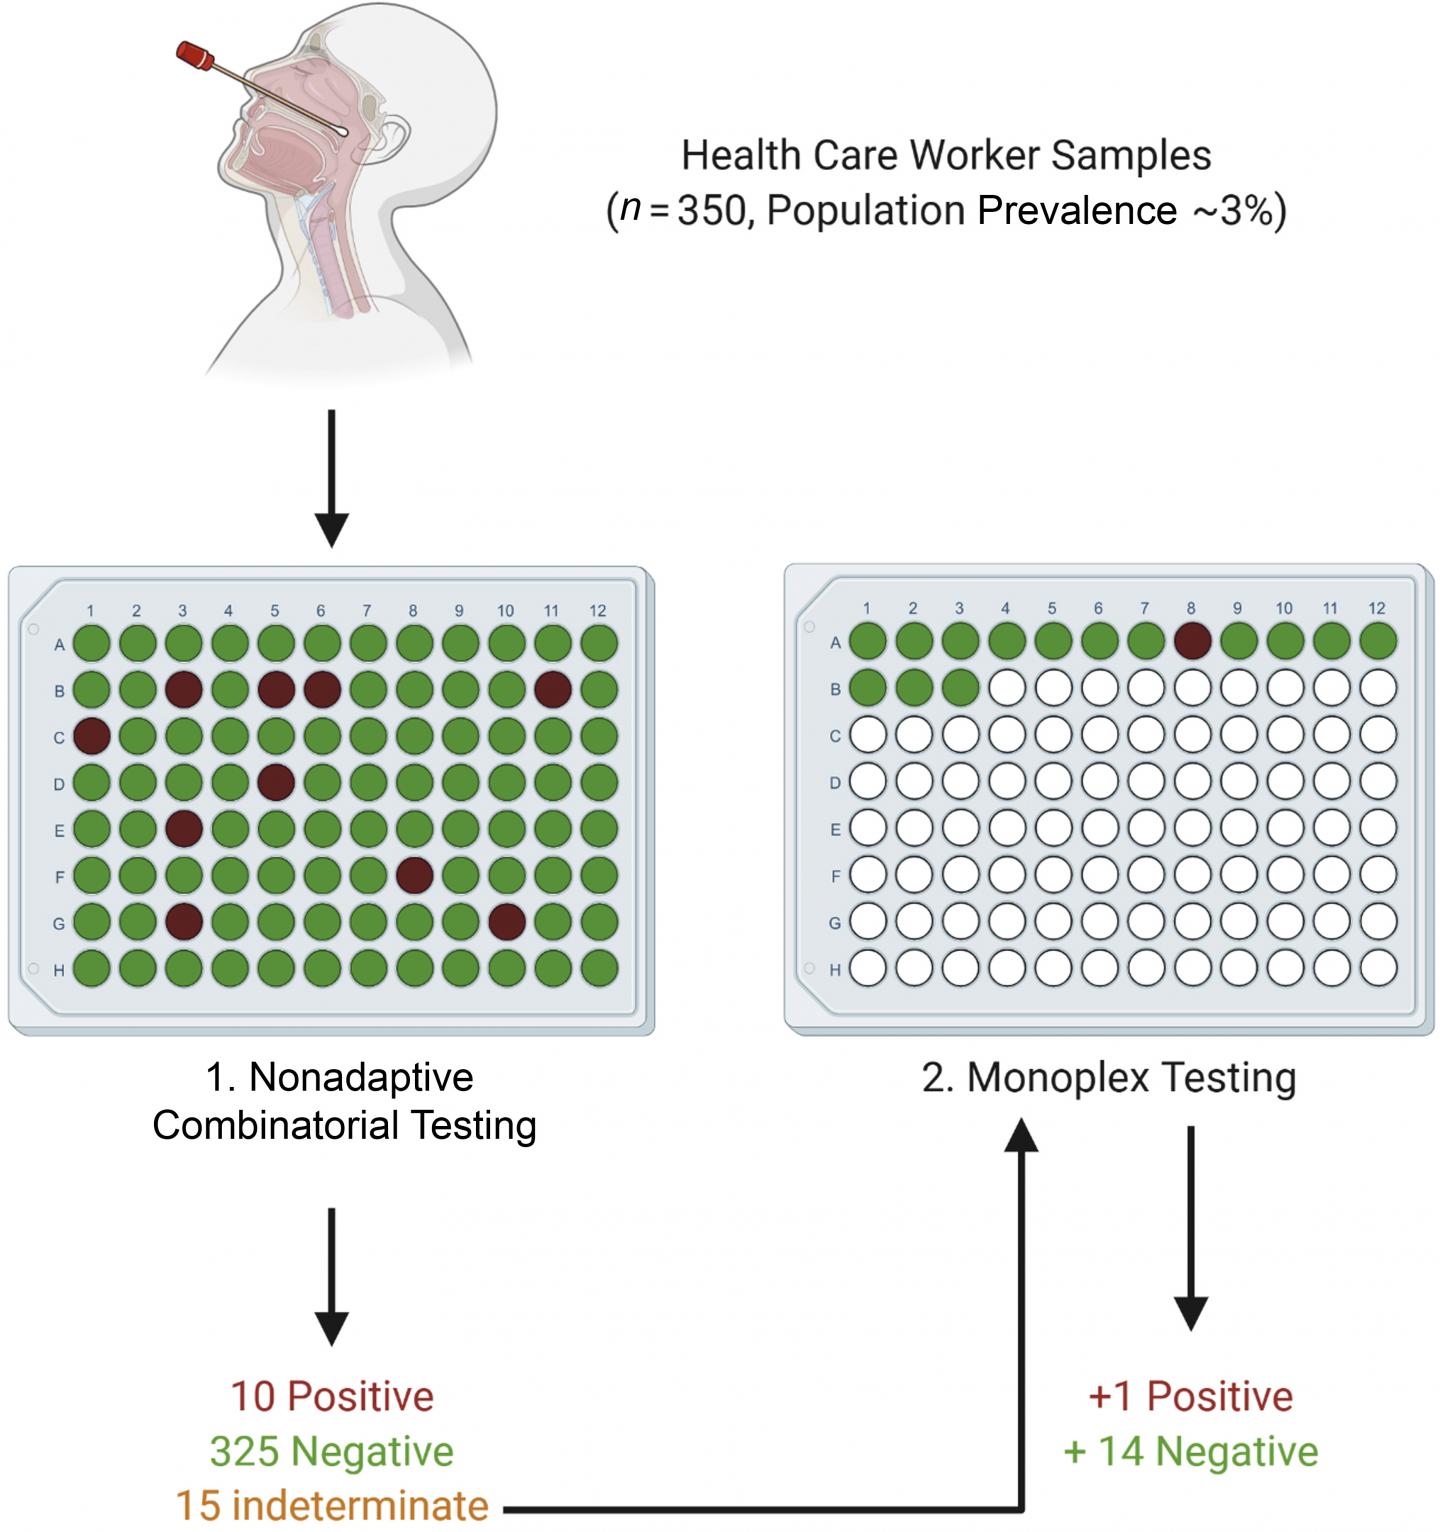 Proposed testing approach for healthcare worker screening